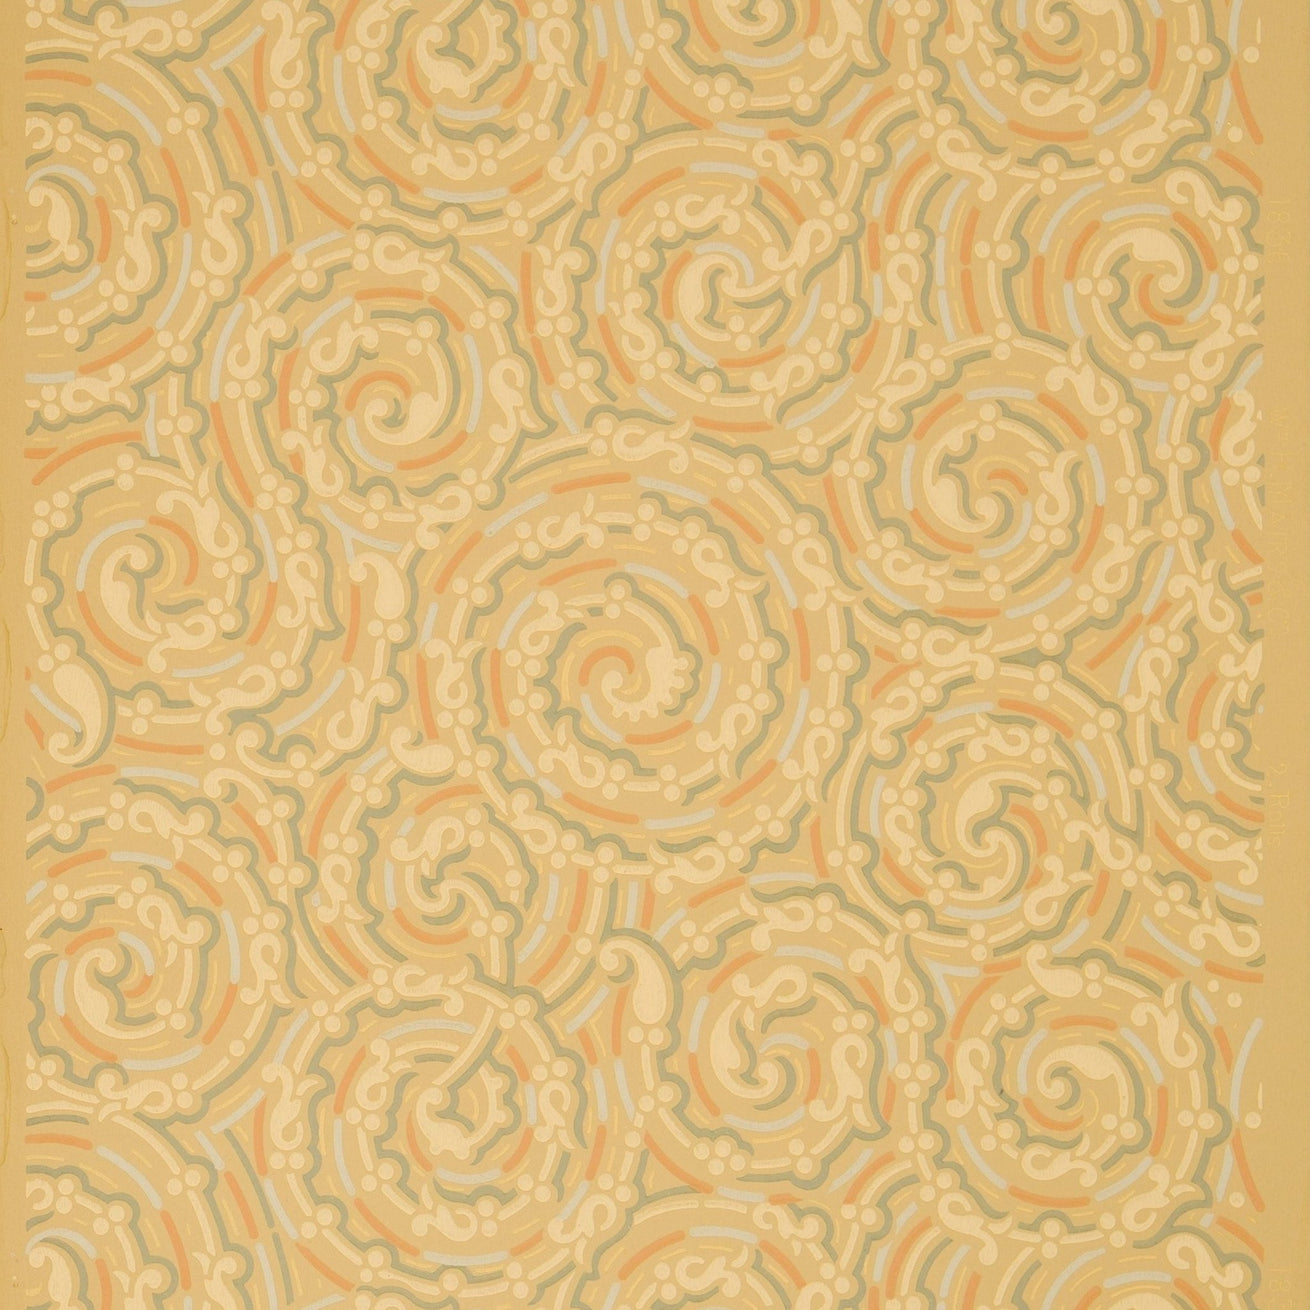 Swirling All-Over Stylized Scrolls - Antique Wallpaper Remnant